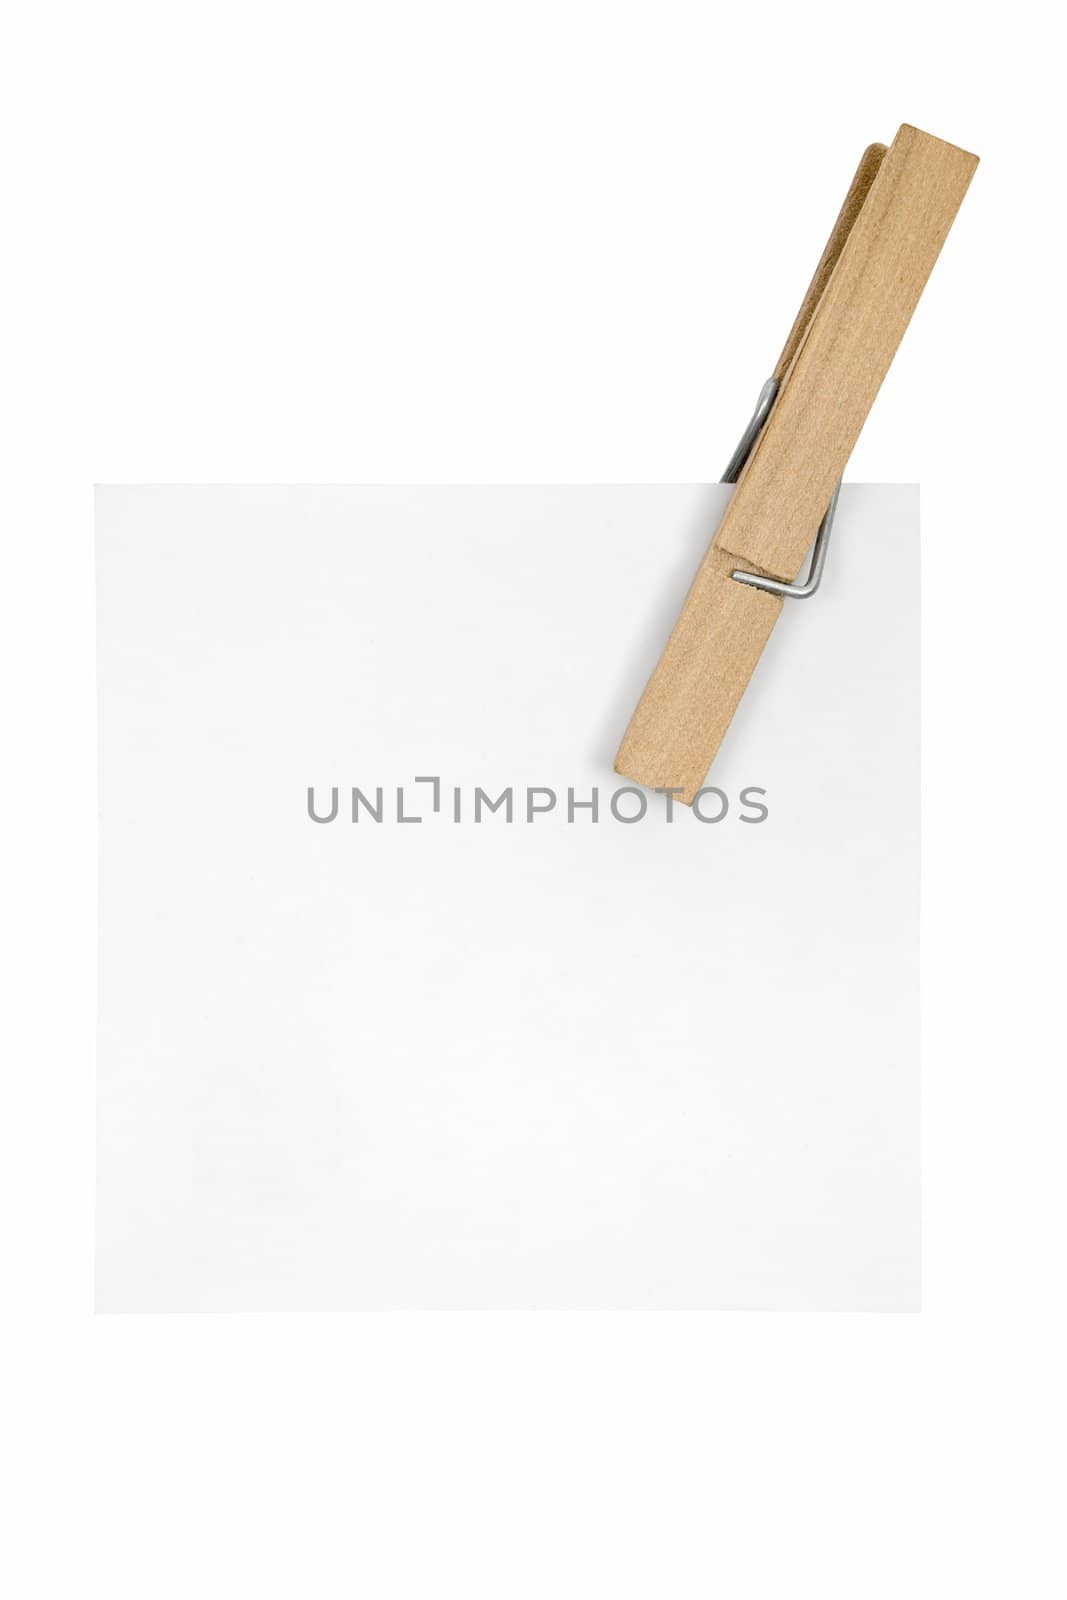 White Note and Clothespin by winterling